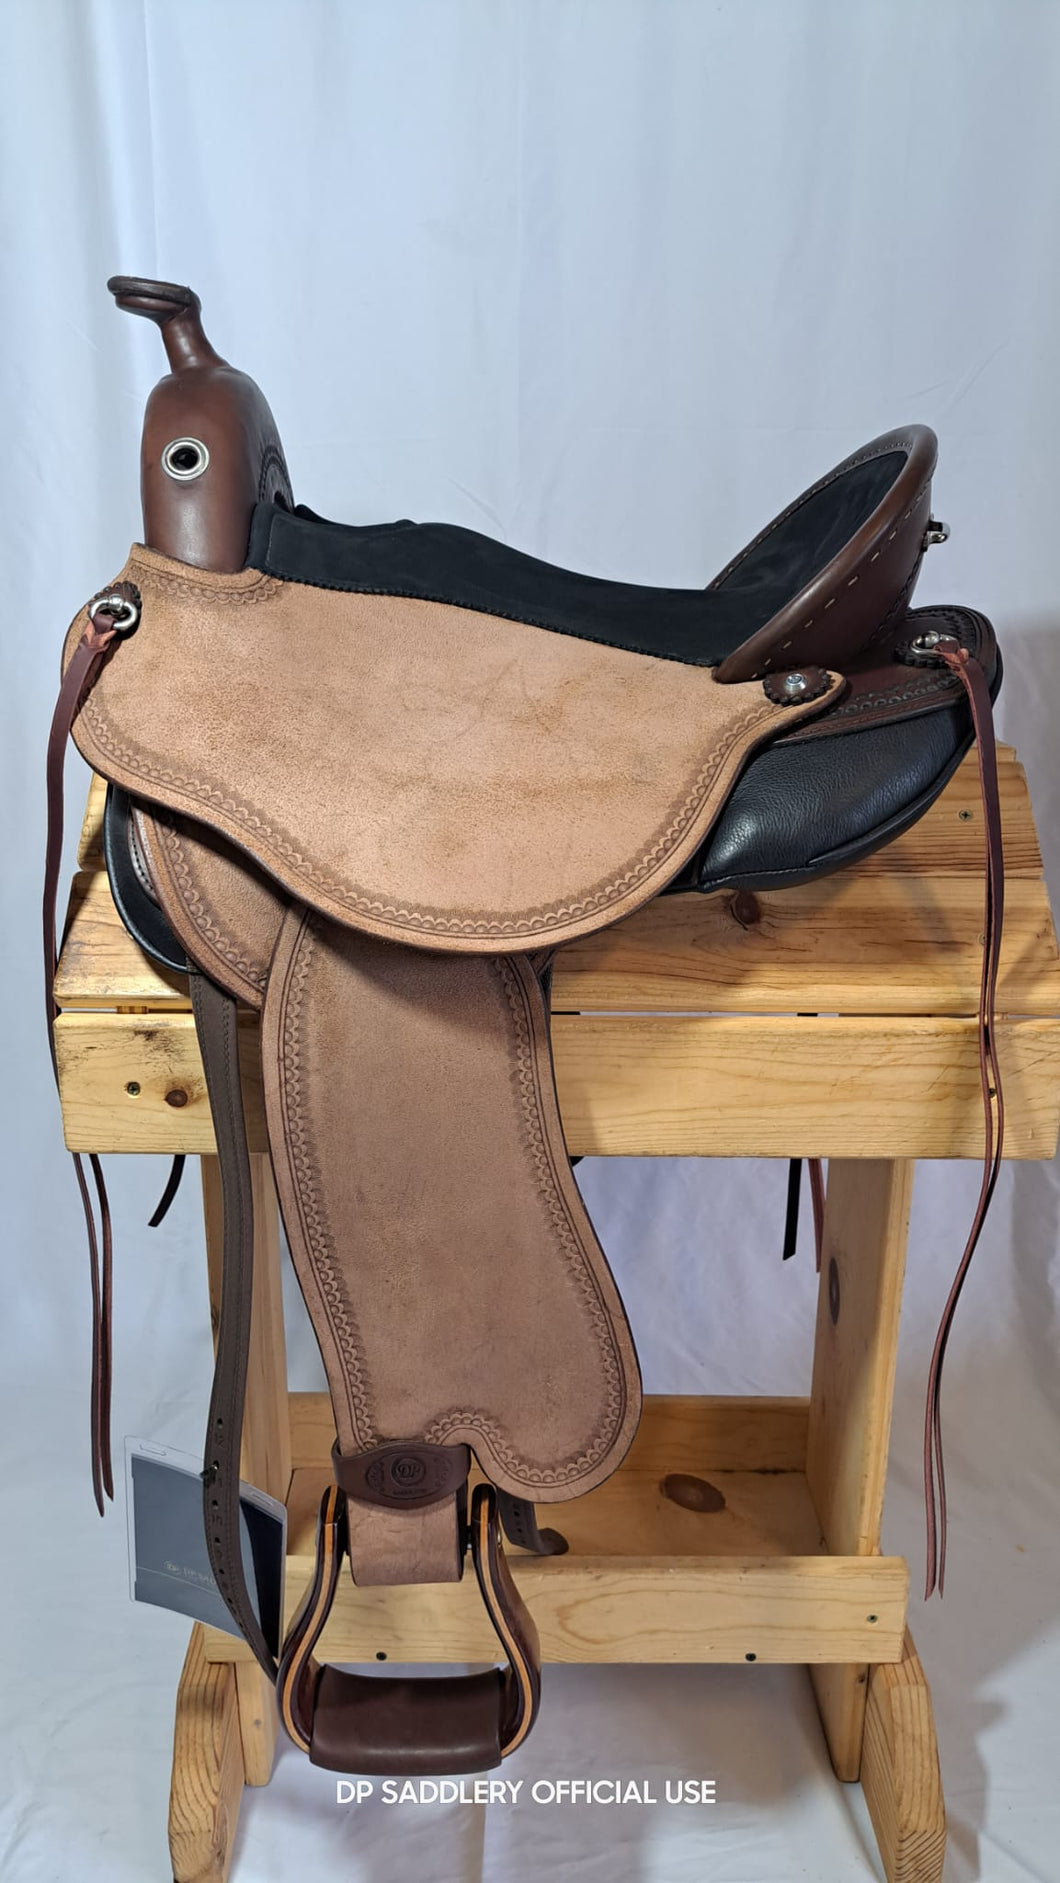 dp saddlery quantum short and light western 7012, side view on a wooden saddle rack, white background